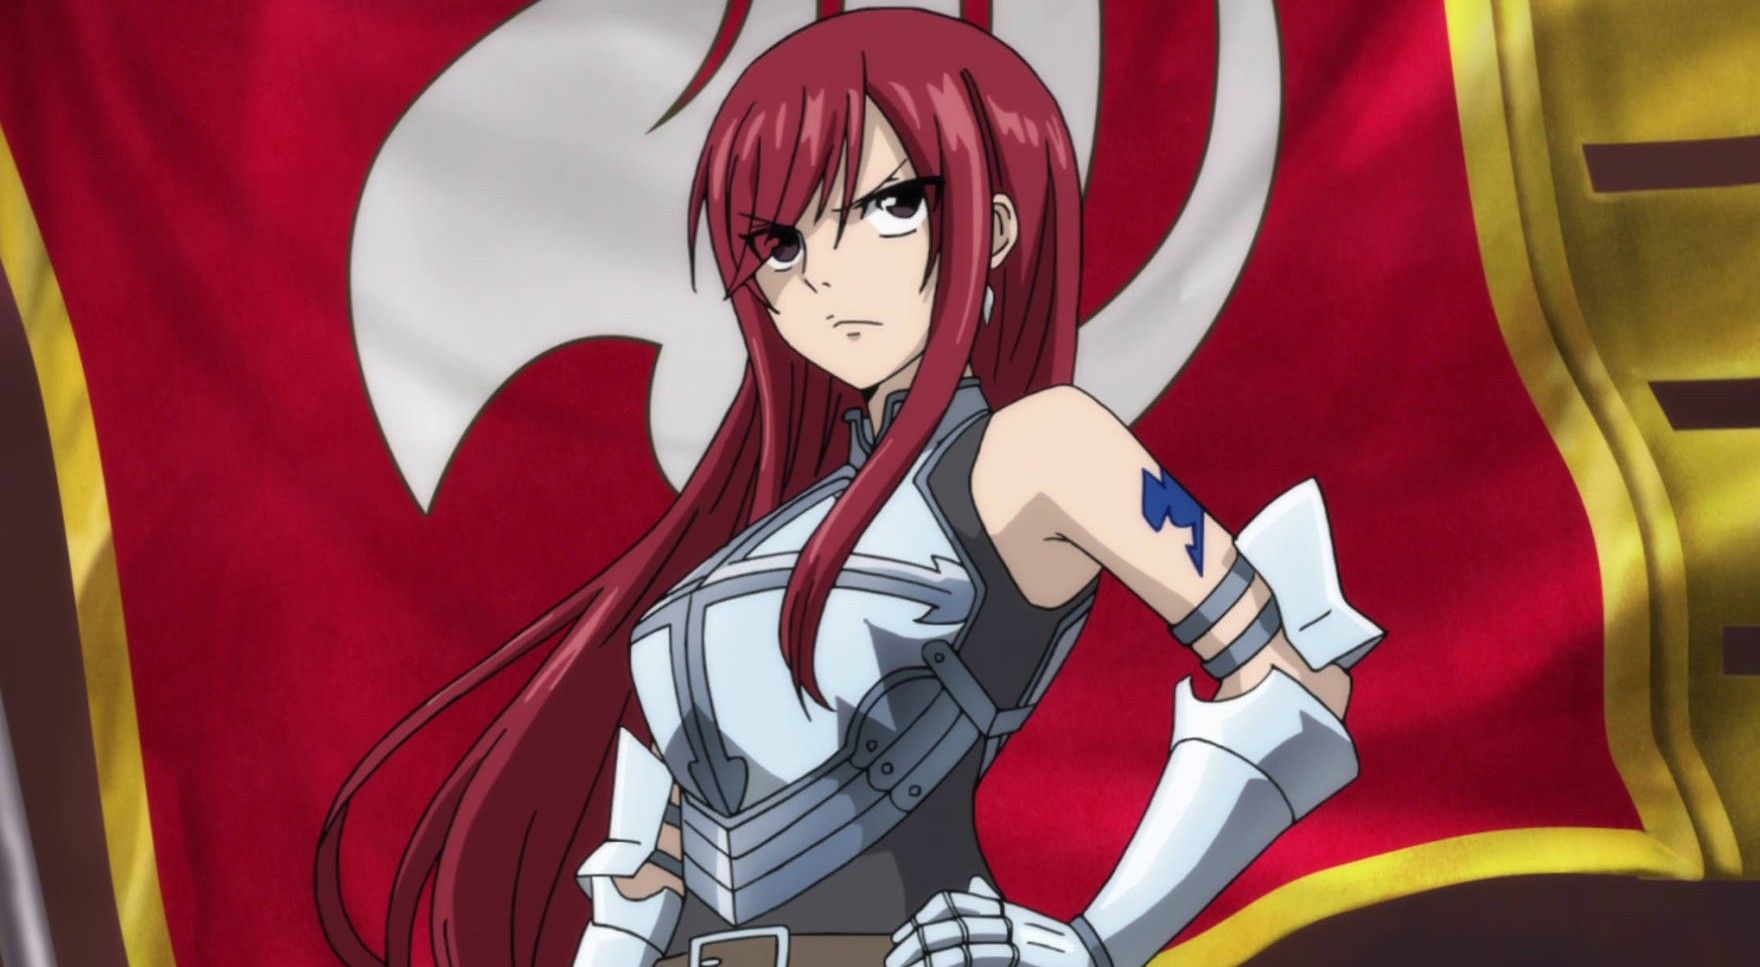 Top 100 Best Female Anime Characters  Erza Scarlet (Fairy Tail)